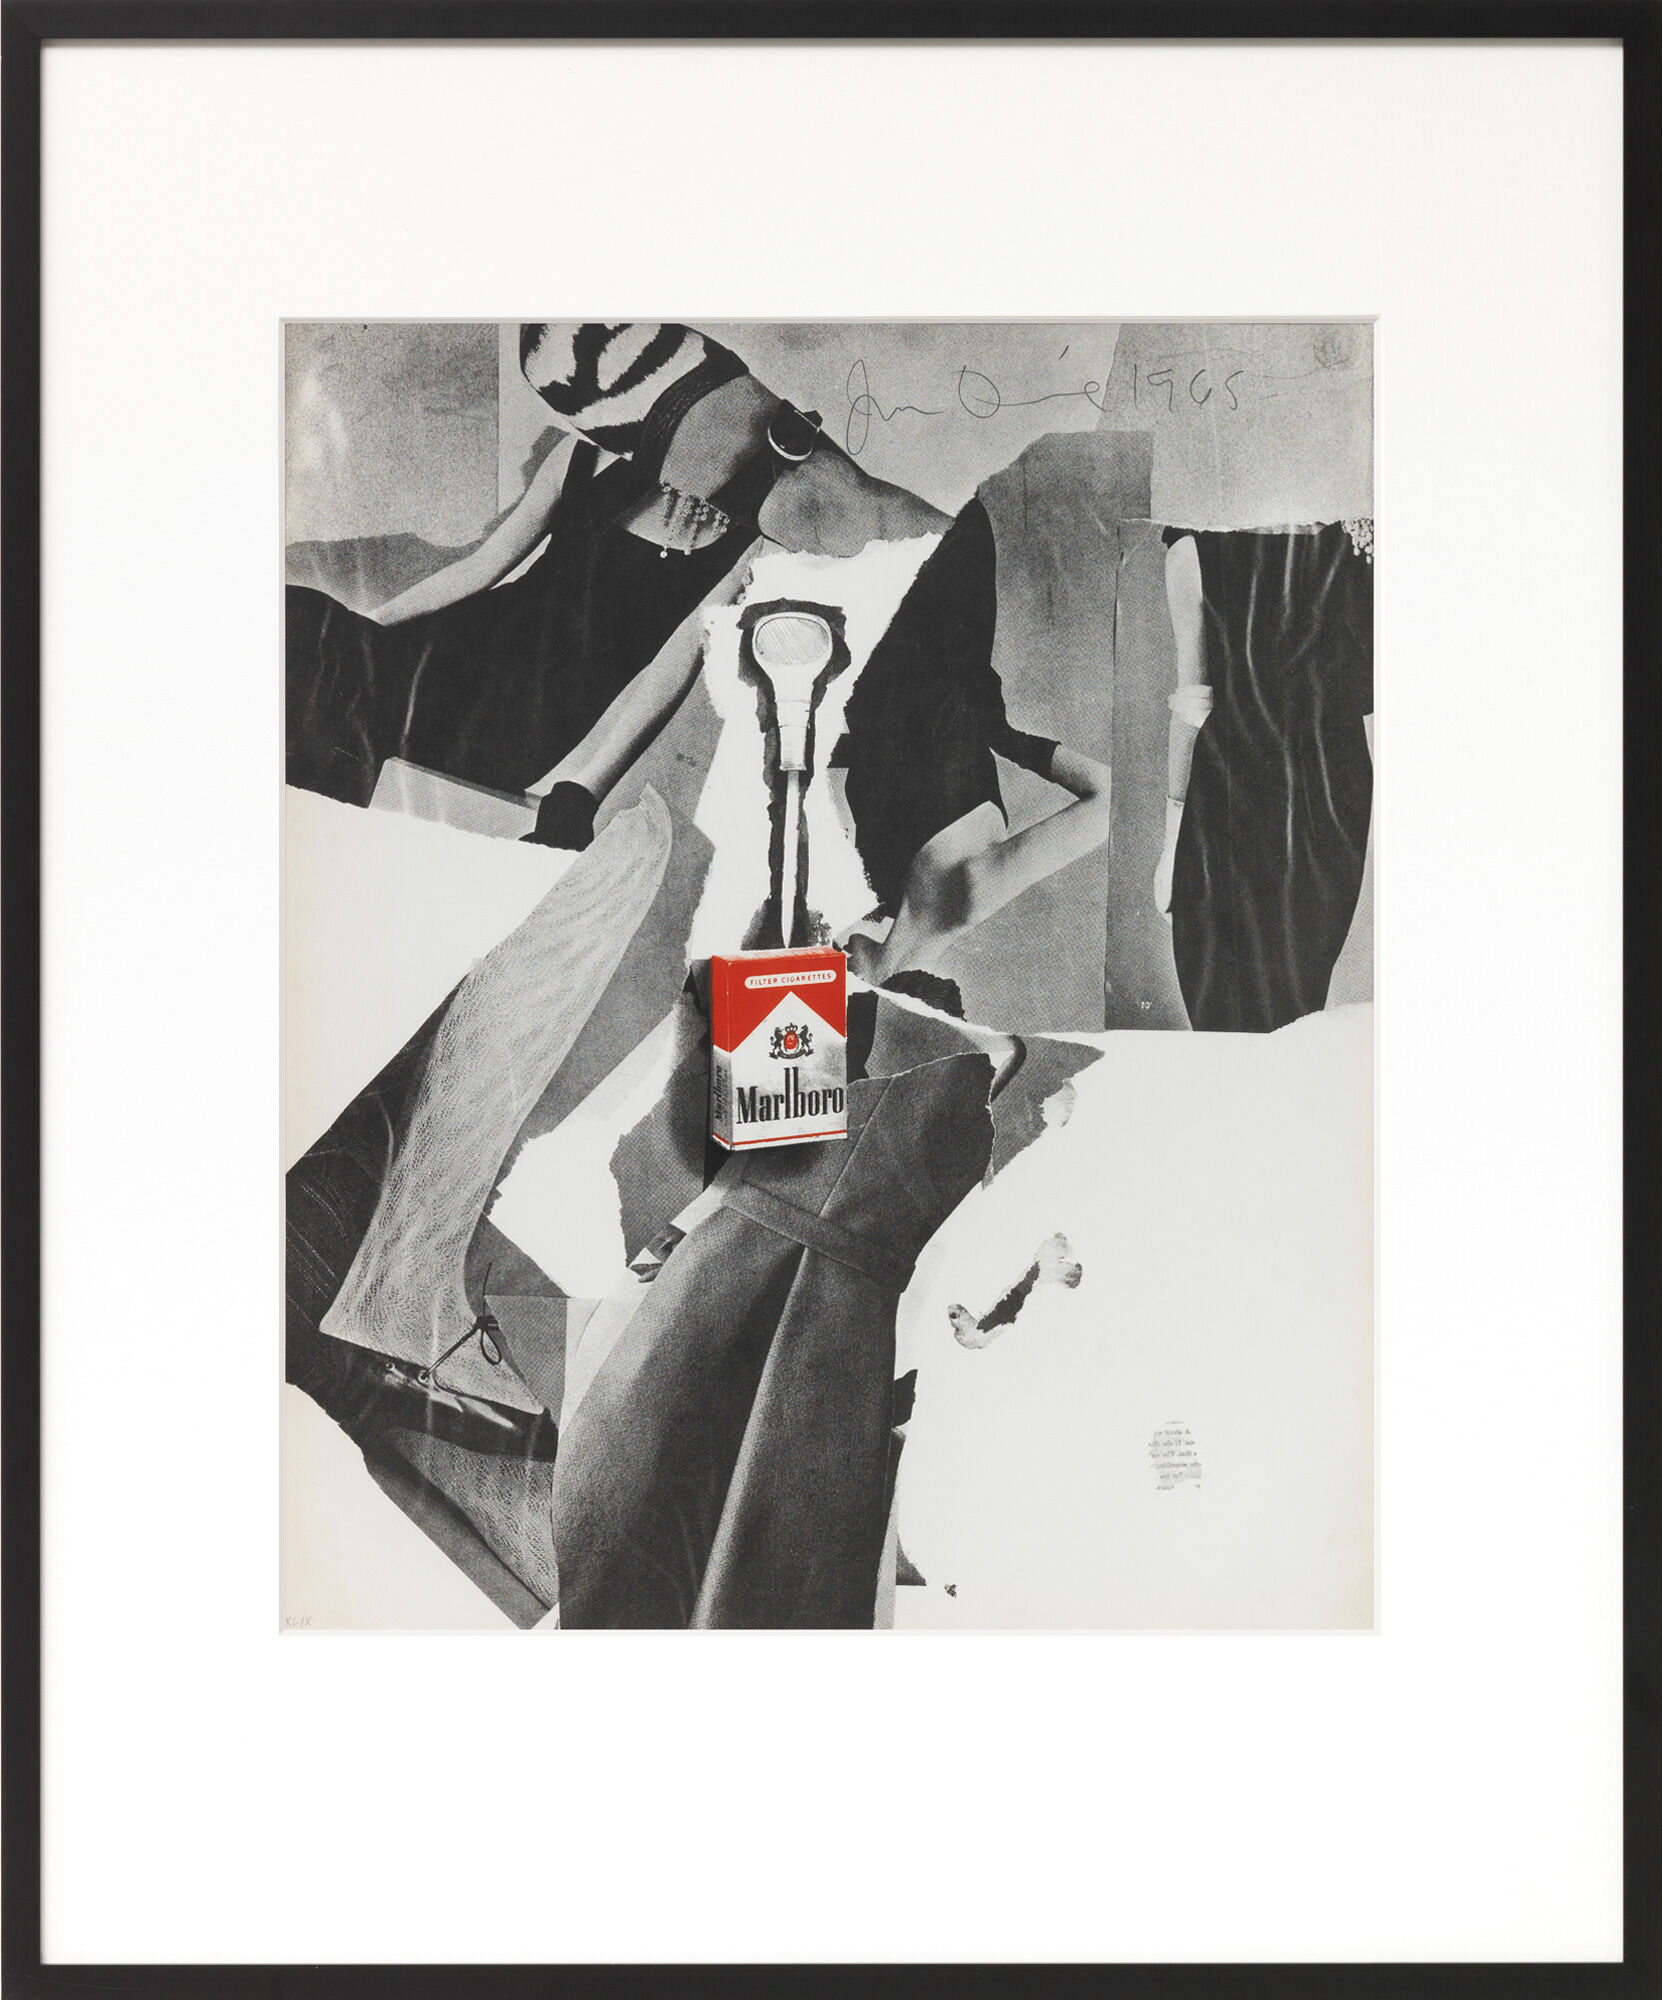 Picture "Awl" (1965) by Jim Dine